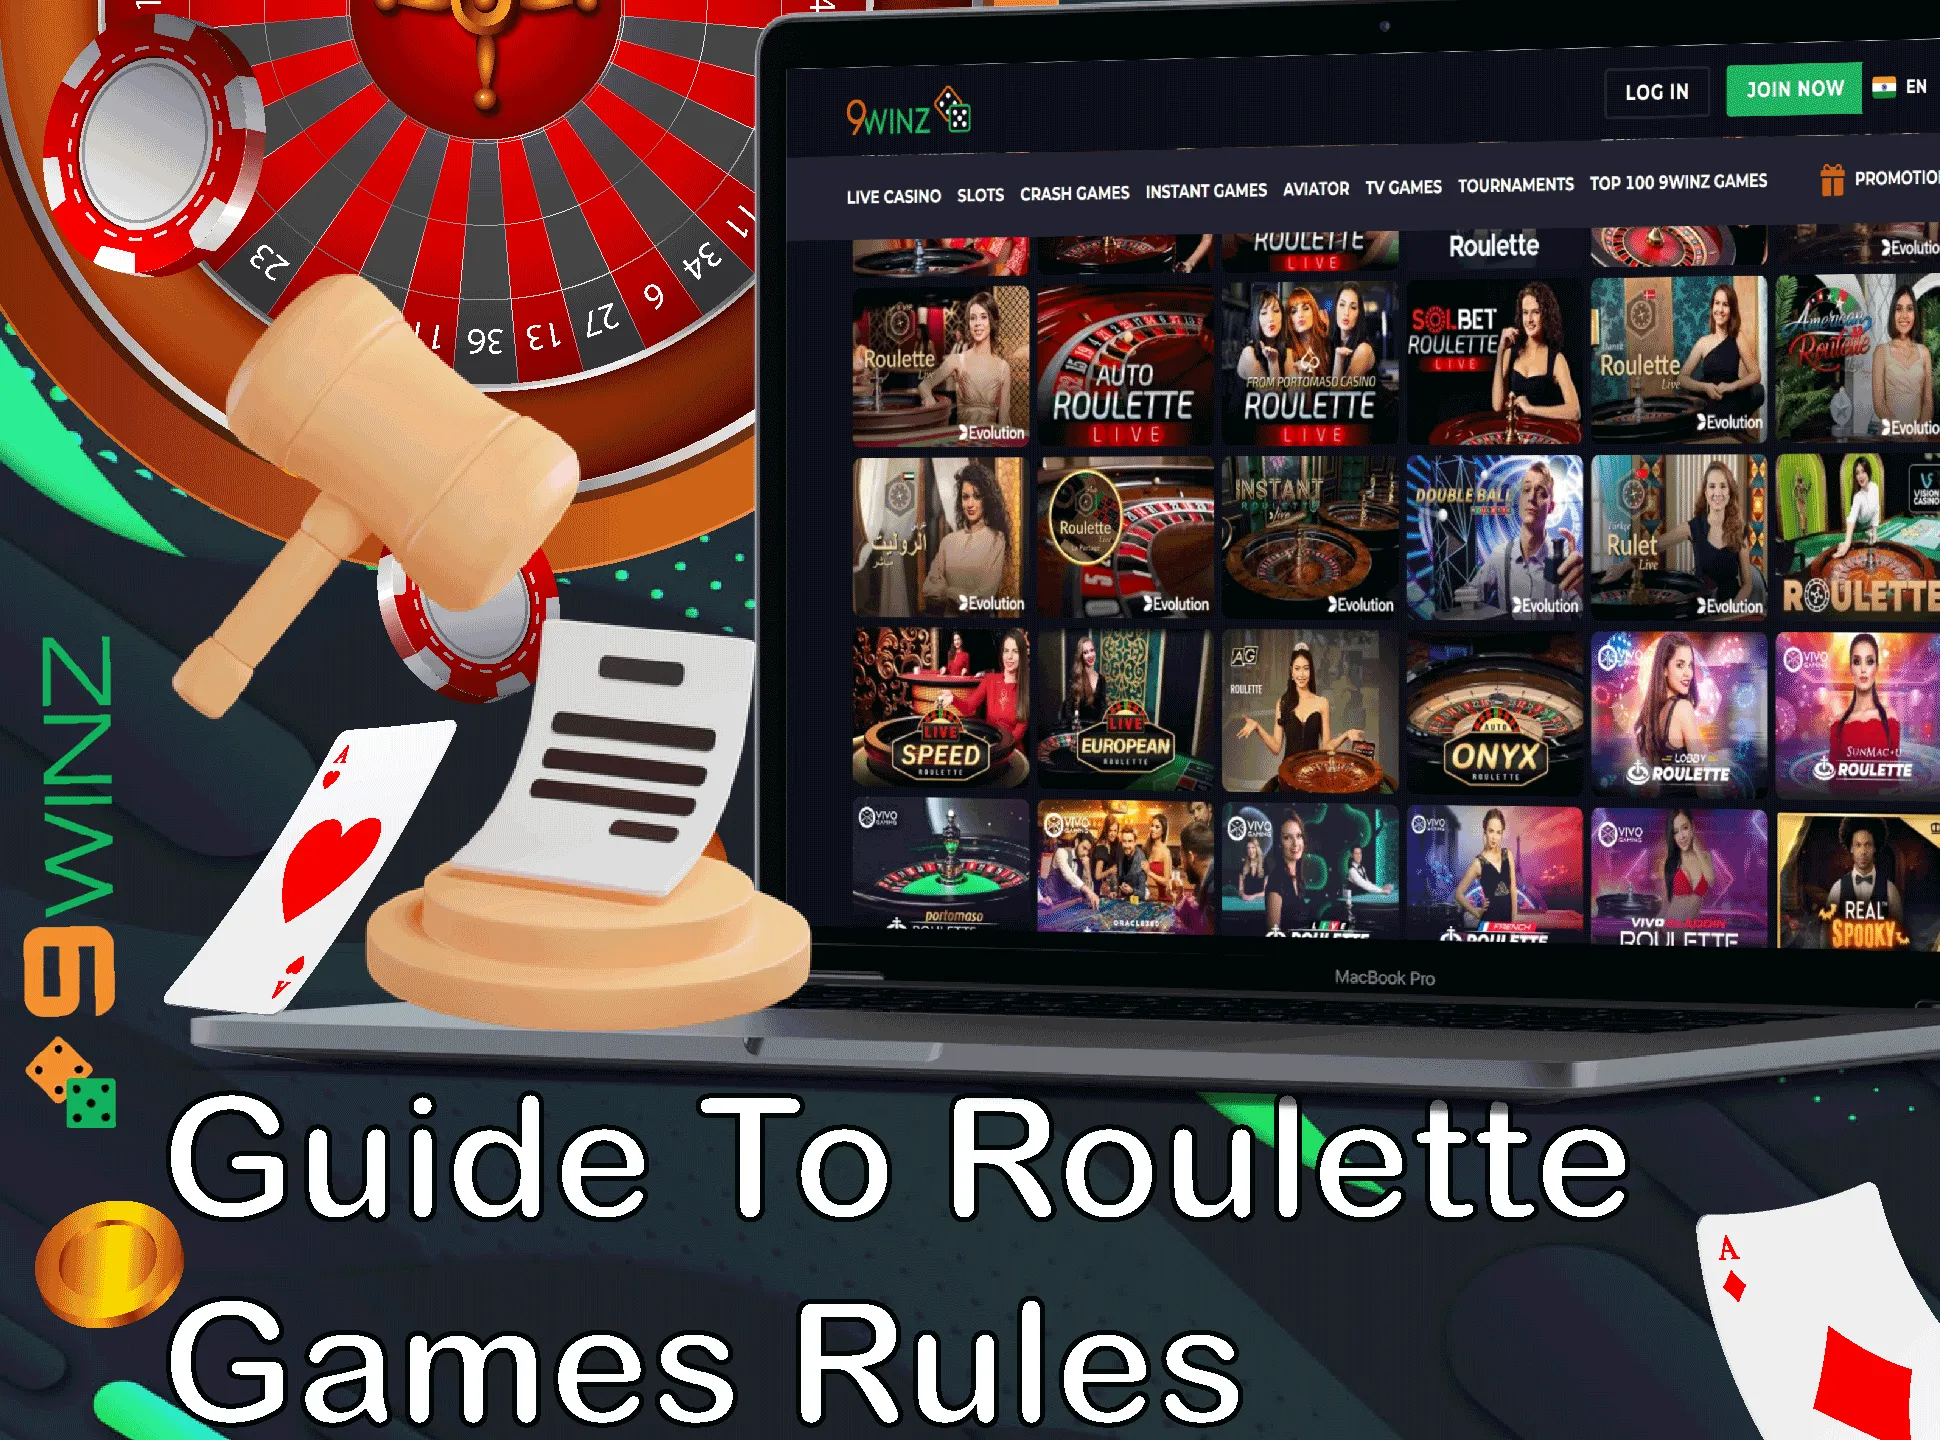 Follow the roulette games rules when you playing the roulette.